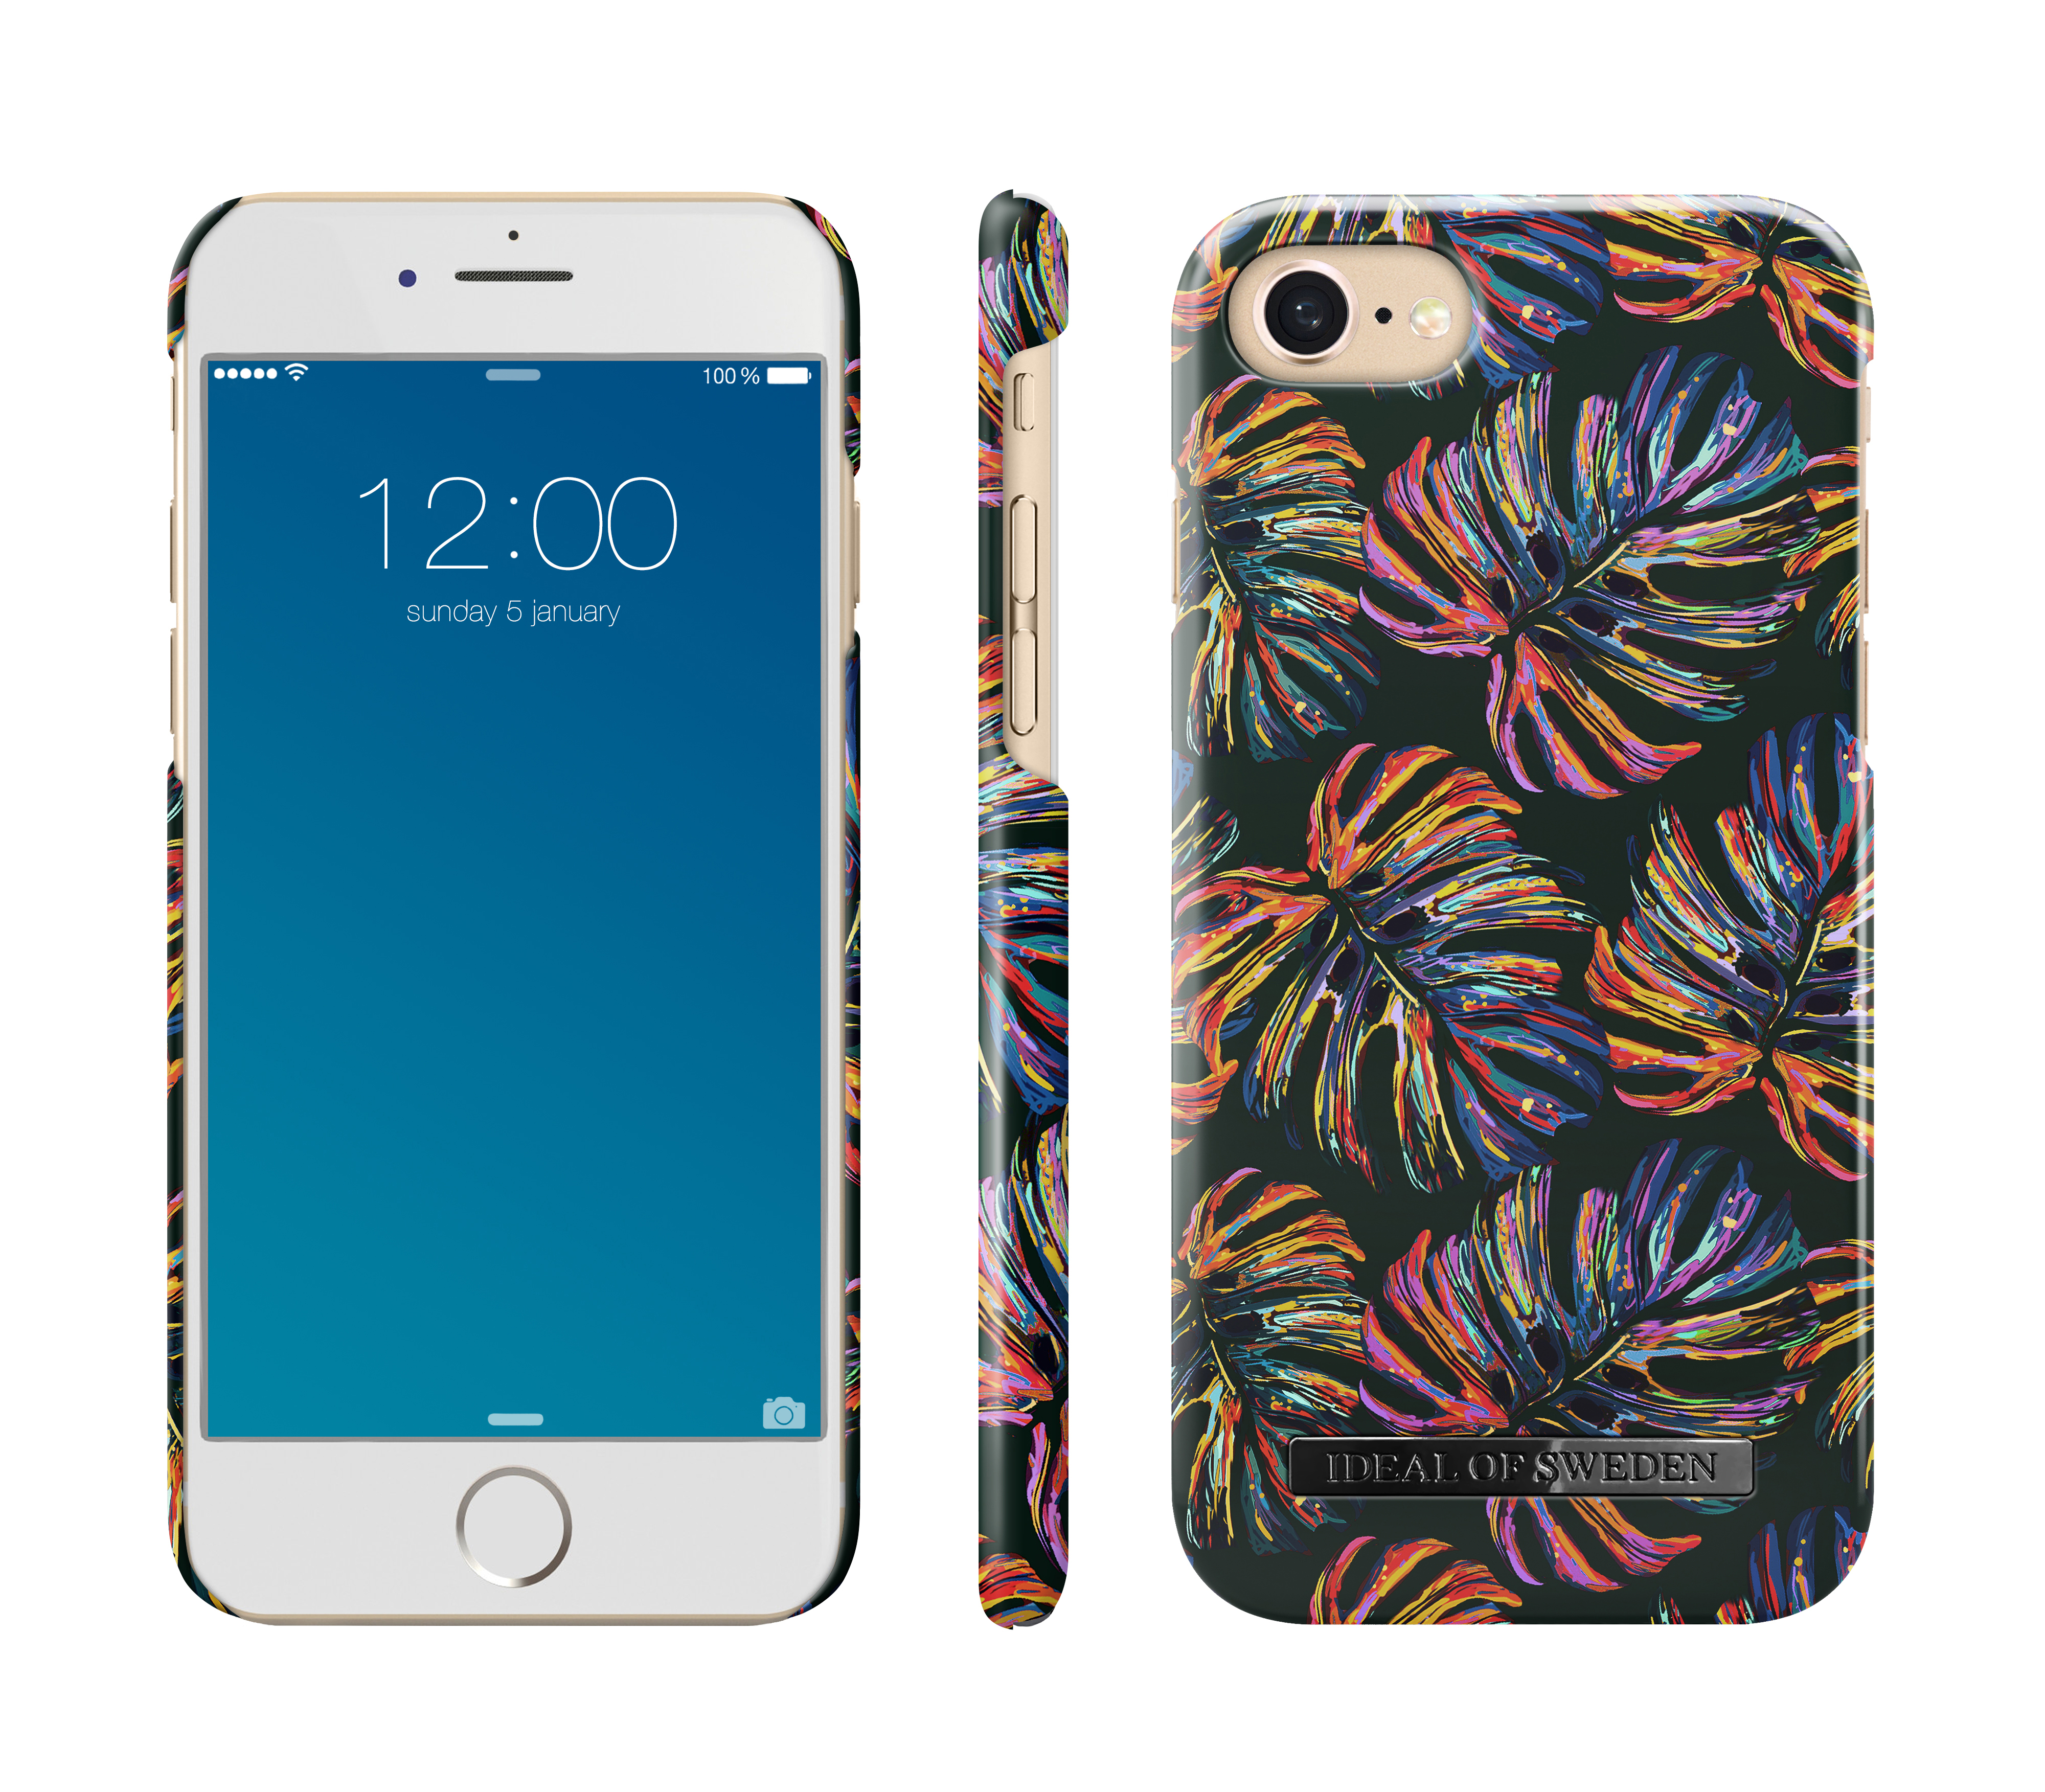 SWEDEN 7, OF Fashion, iPhone Backcover, Apple, IDEAL Tropical Neon